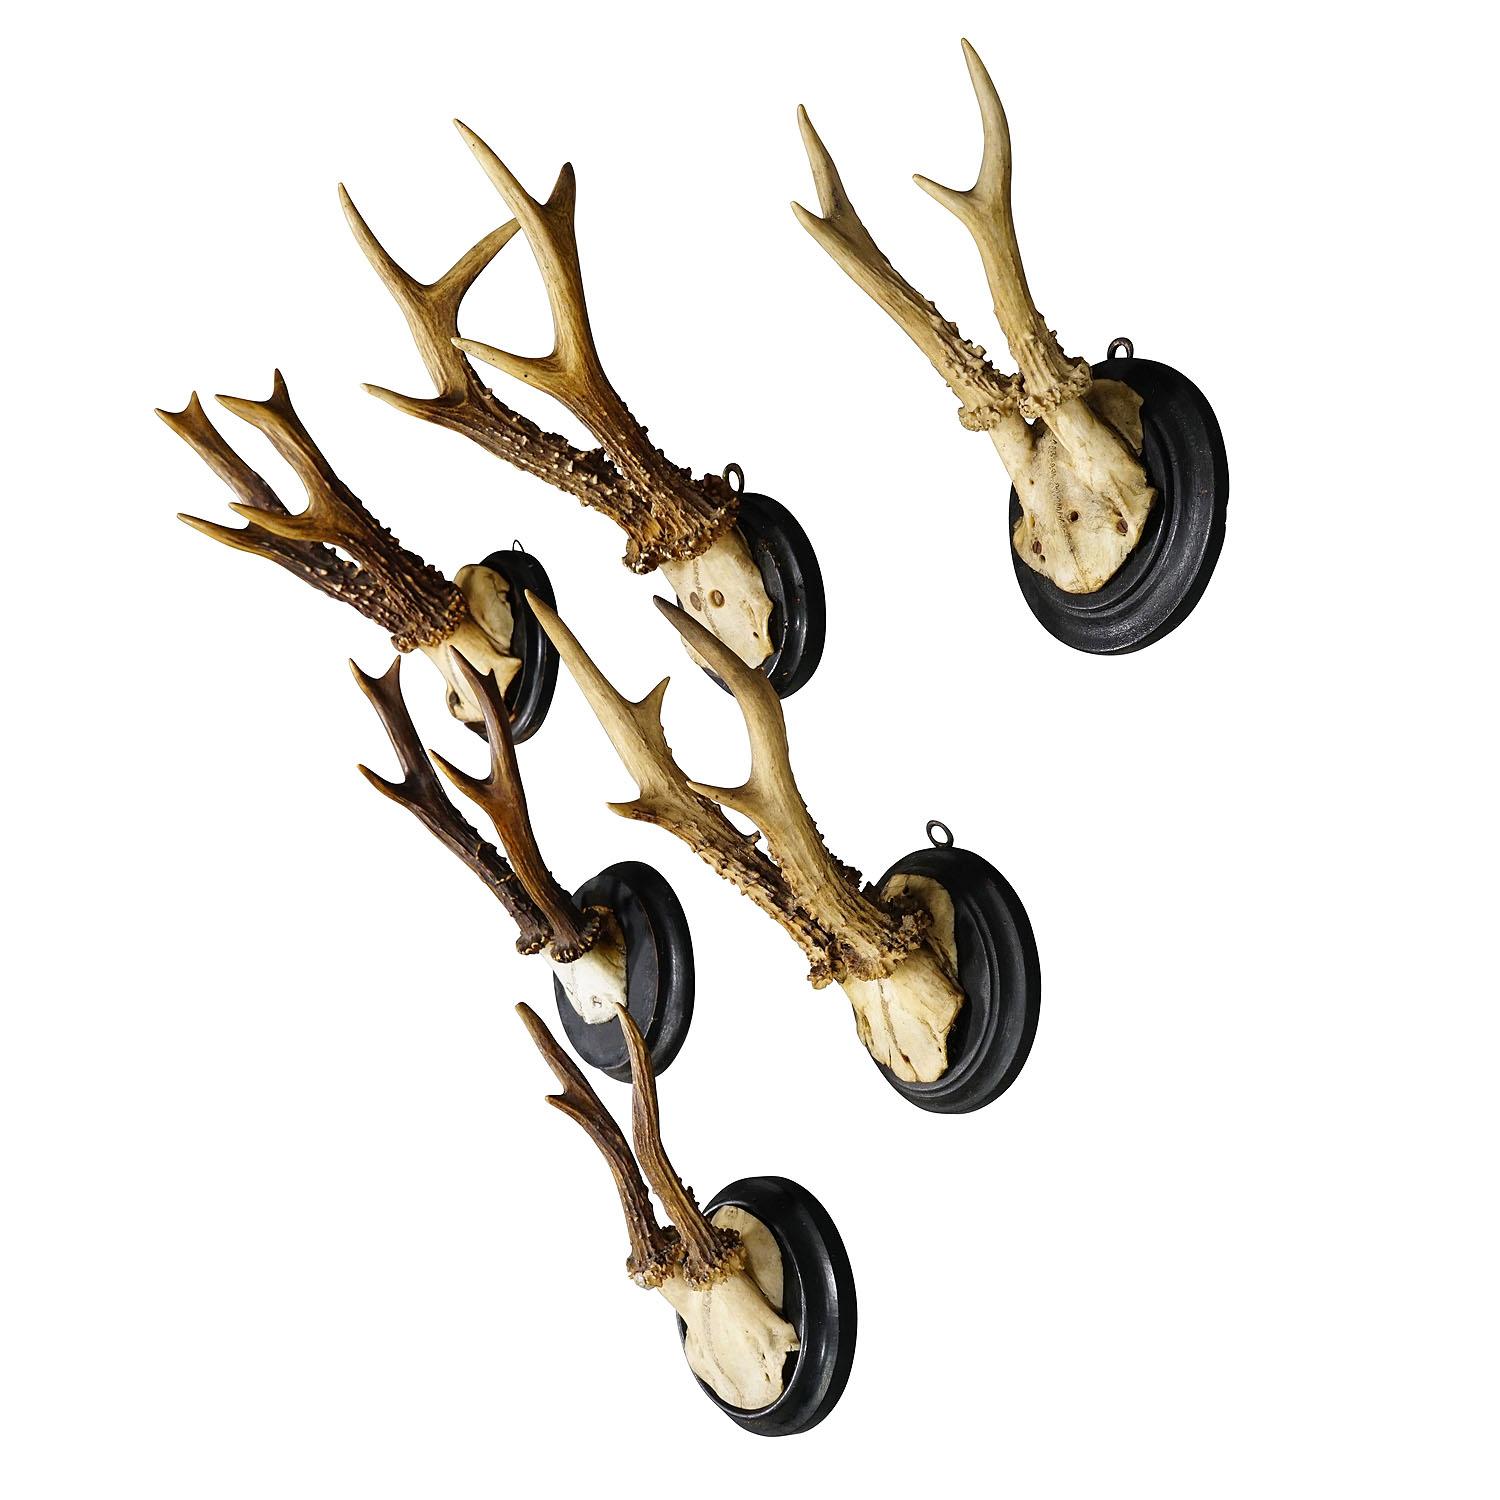 Six Roe Deer Trophies on Turned Plaques Germany ca. 1900s

A set of six Black Forest roe deer (Capreolus capreolus) trophies mounted on turned wooden plaques. The trophies were shot in Germany around 1900.  A great addition to every rustic cabin